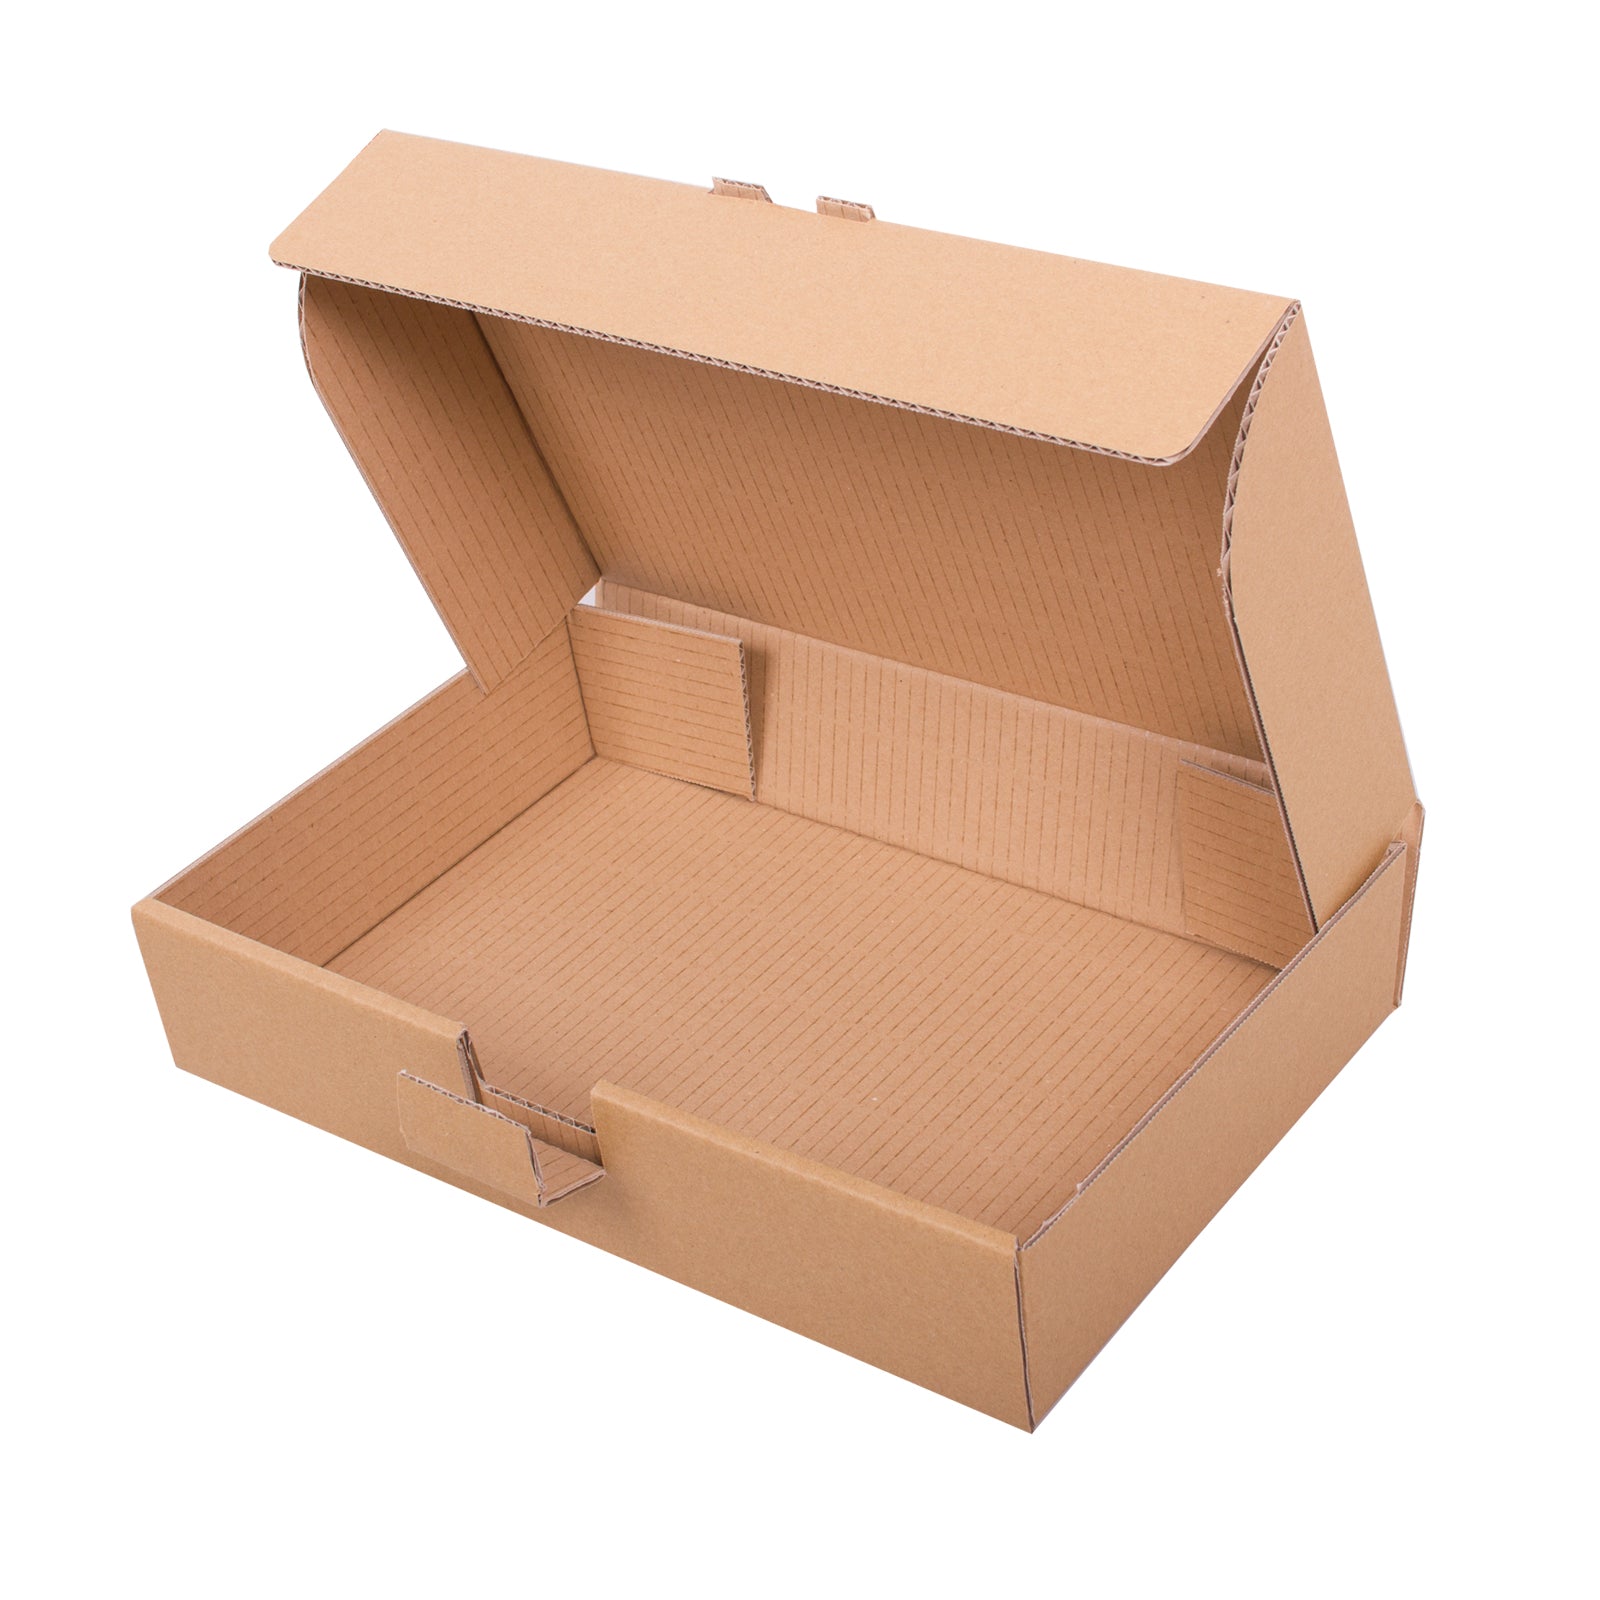 Midi Parcel Royal Mail Small Parcel PiP Cardboard Boxes,SR Mailing,